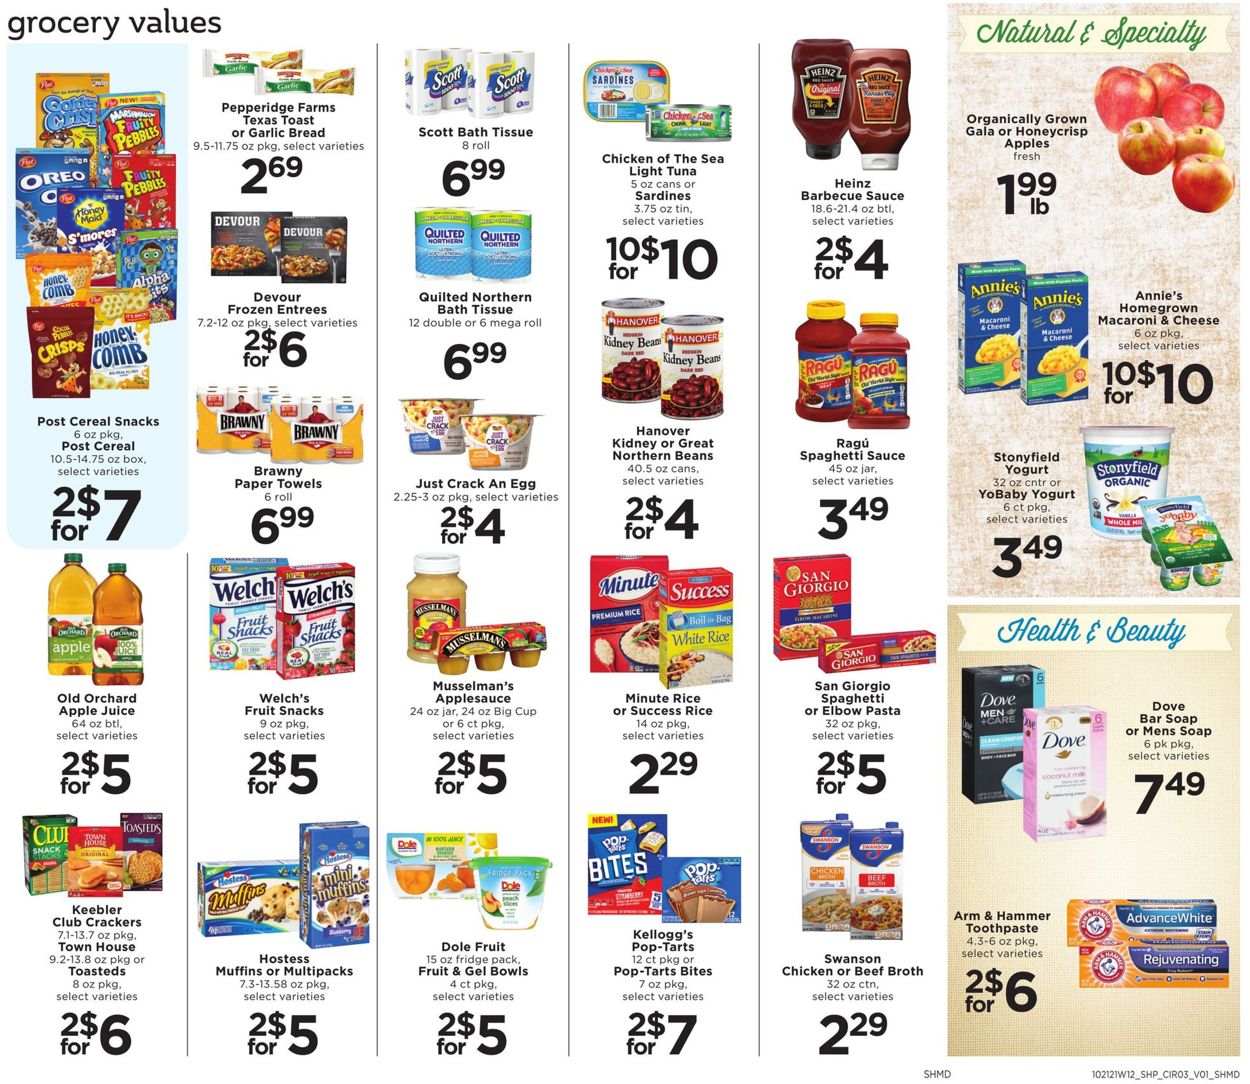 Shoppers Food & Pharmacy Ad from 10/21/2021